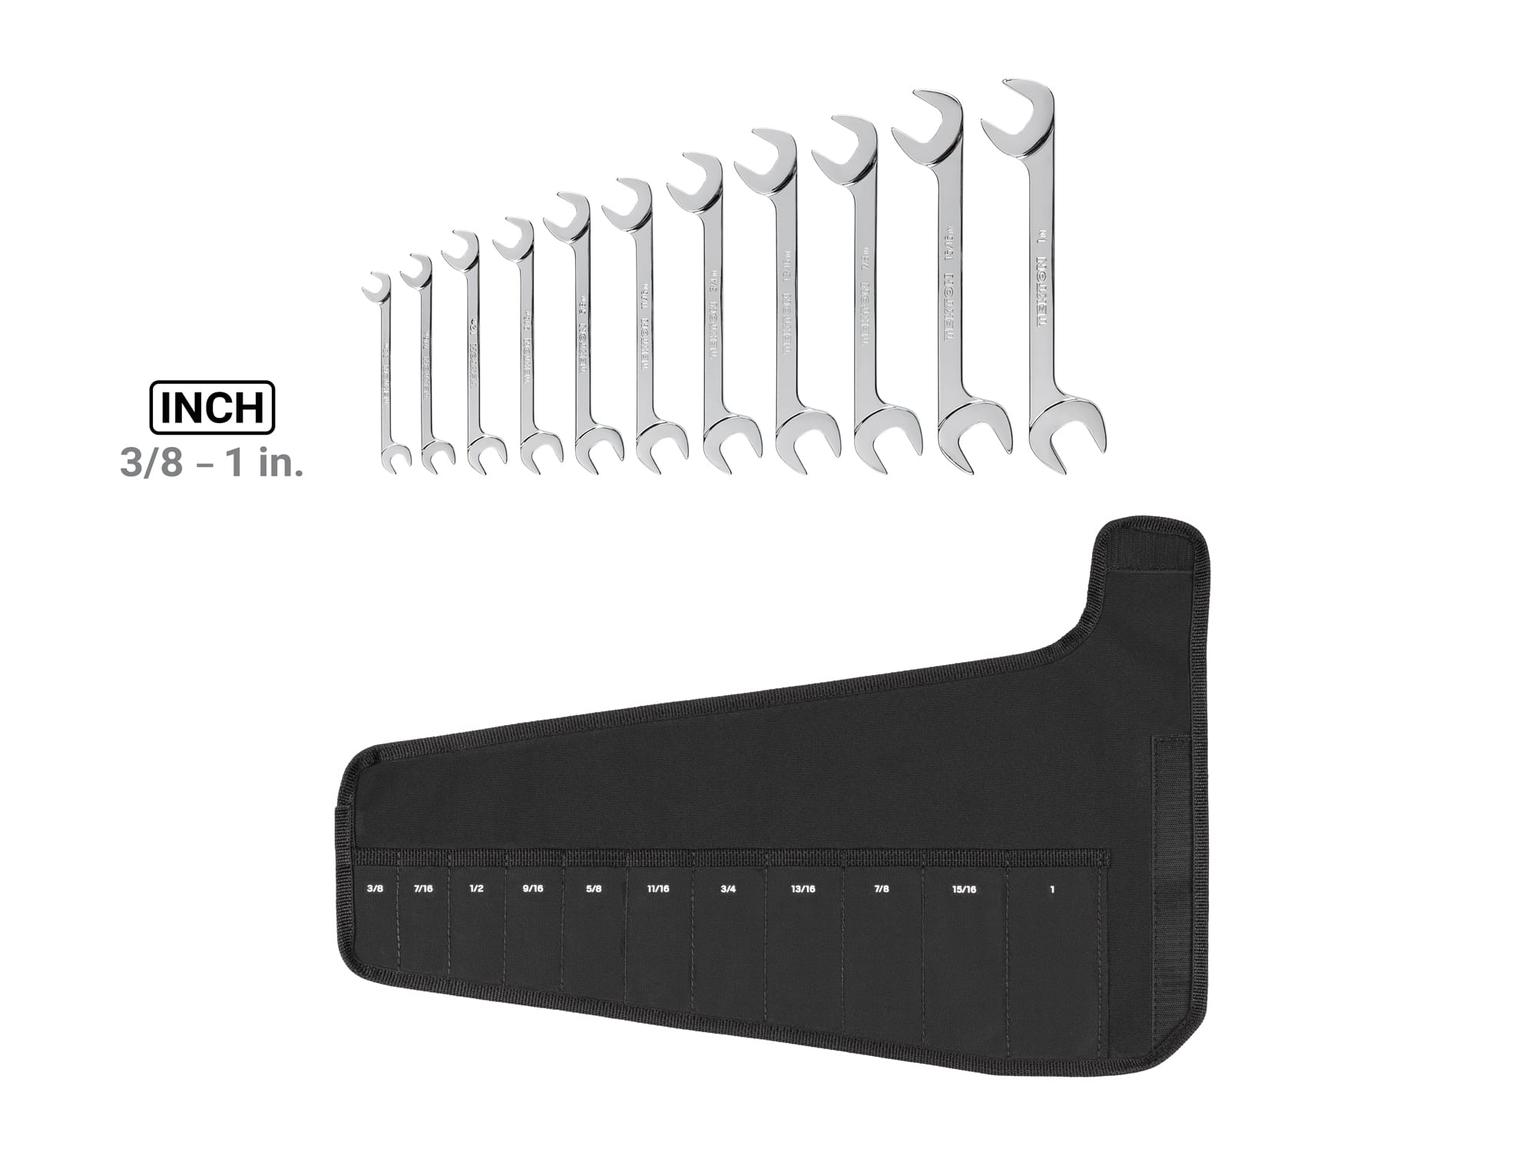 TEKTON WAE92102-T Angle Head Open End Wrench Set with Pouch, 11-Piece (3/8 - 1 in.)